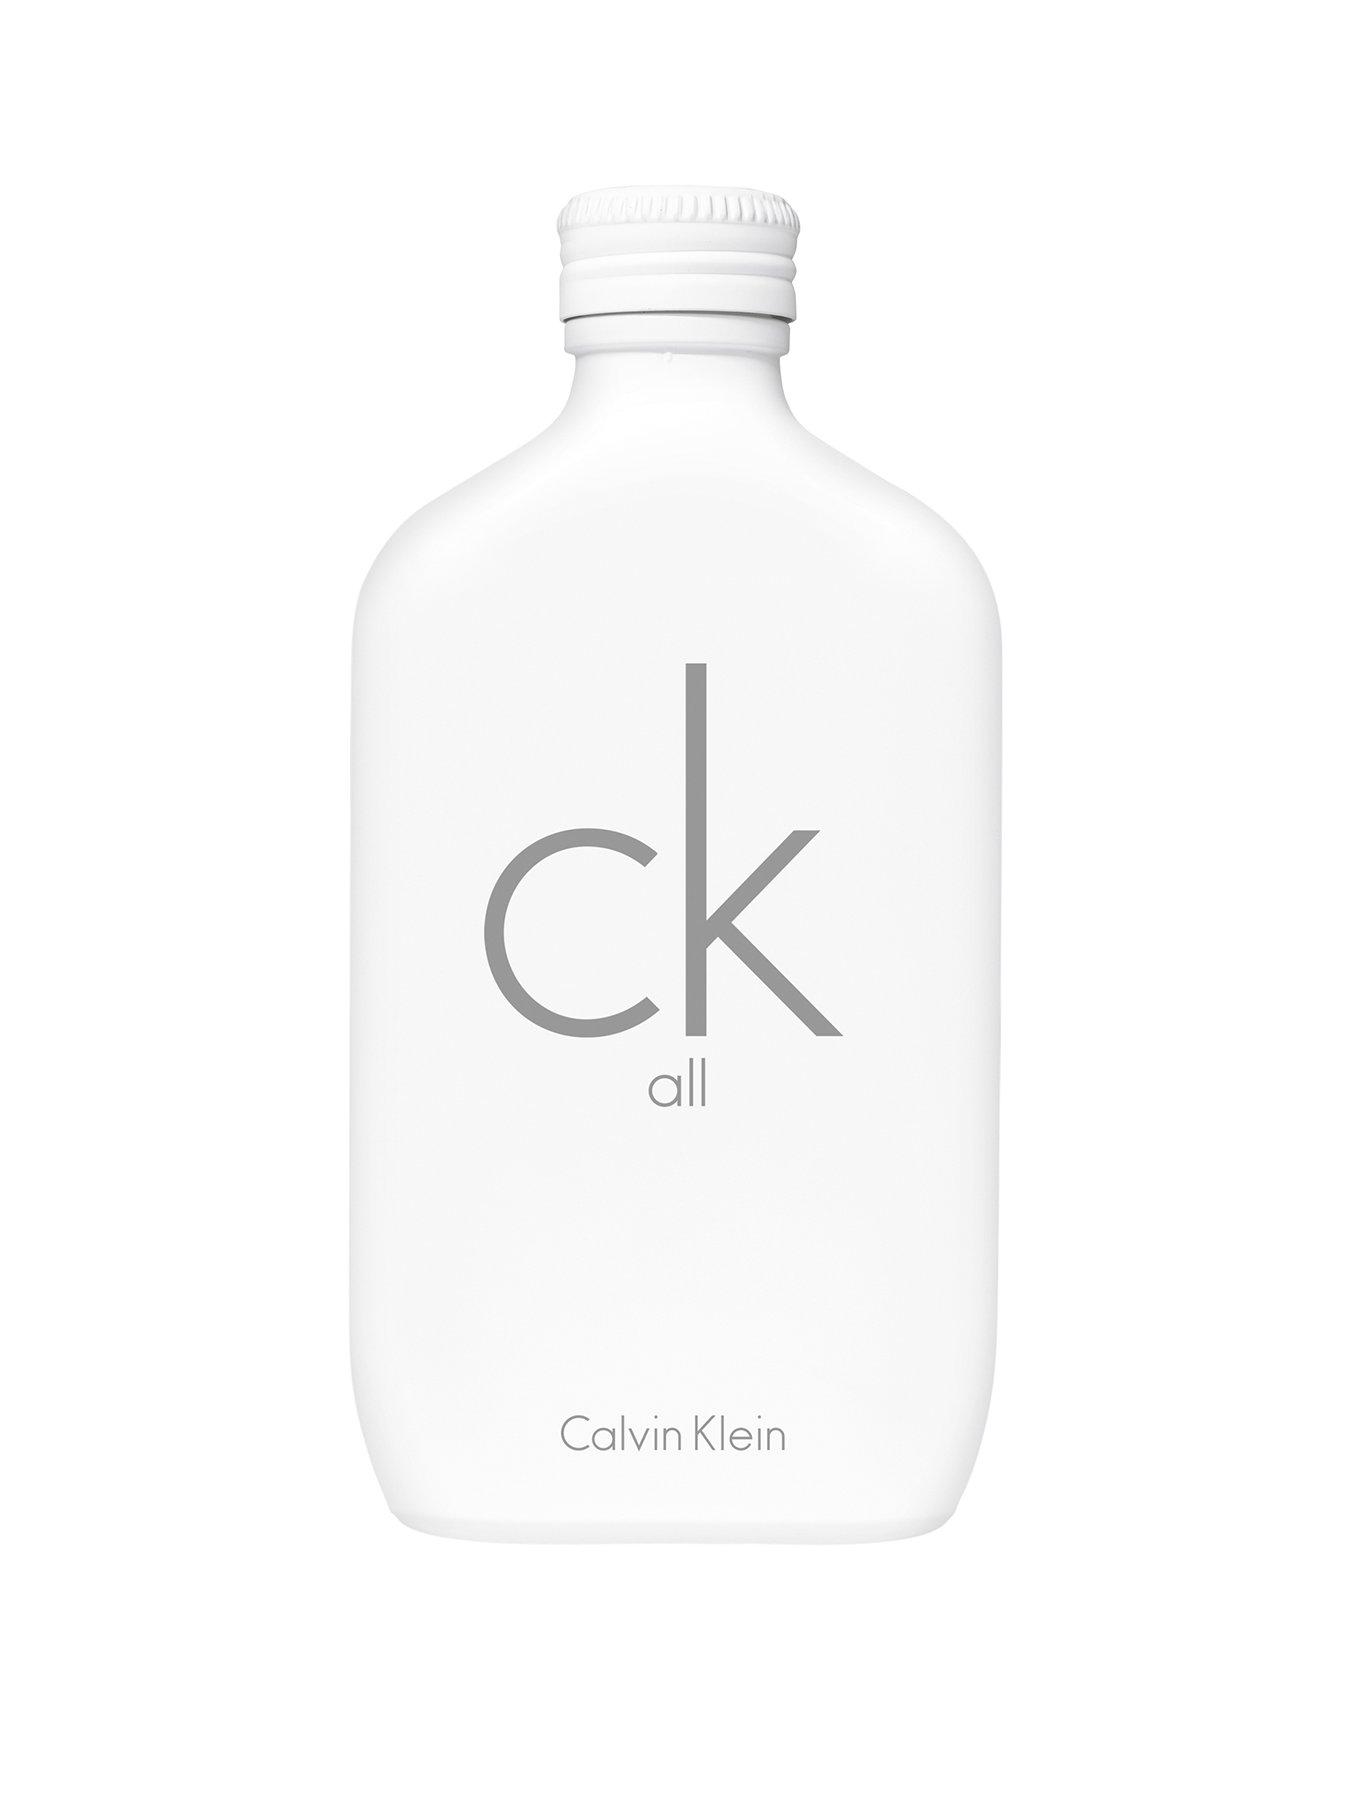 ck all aftershave